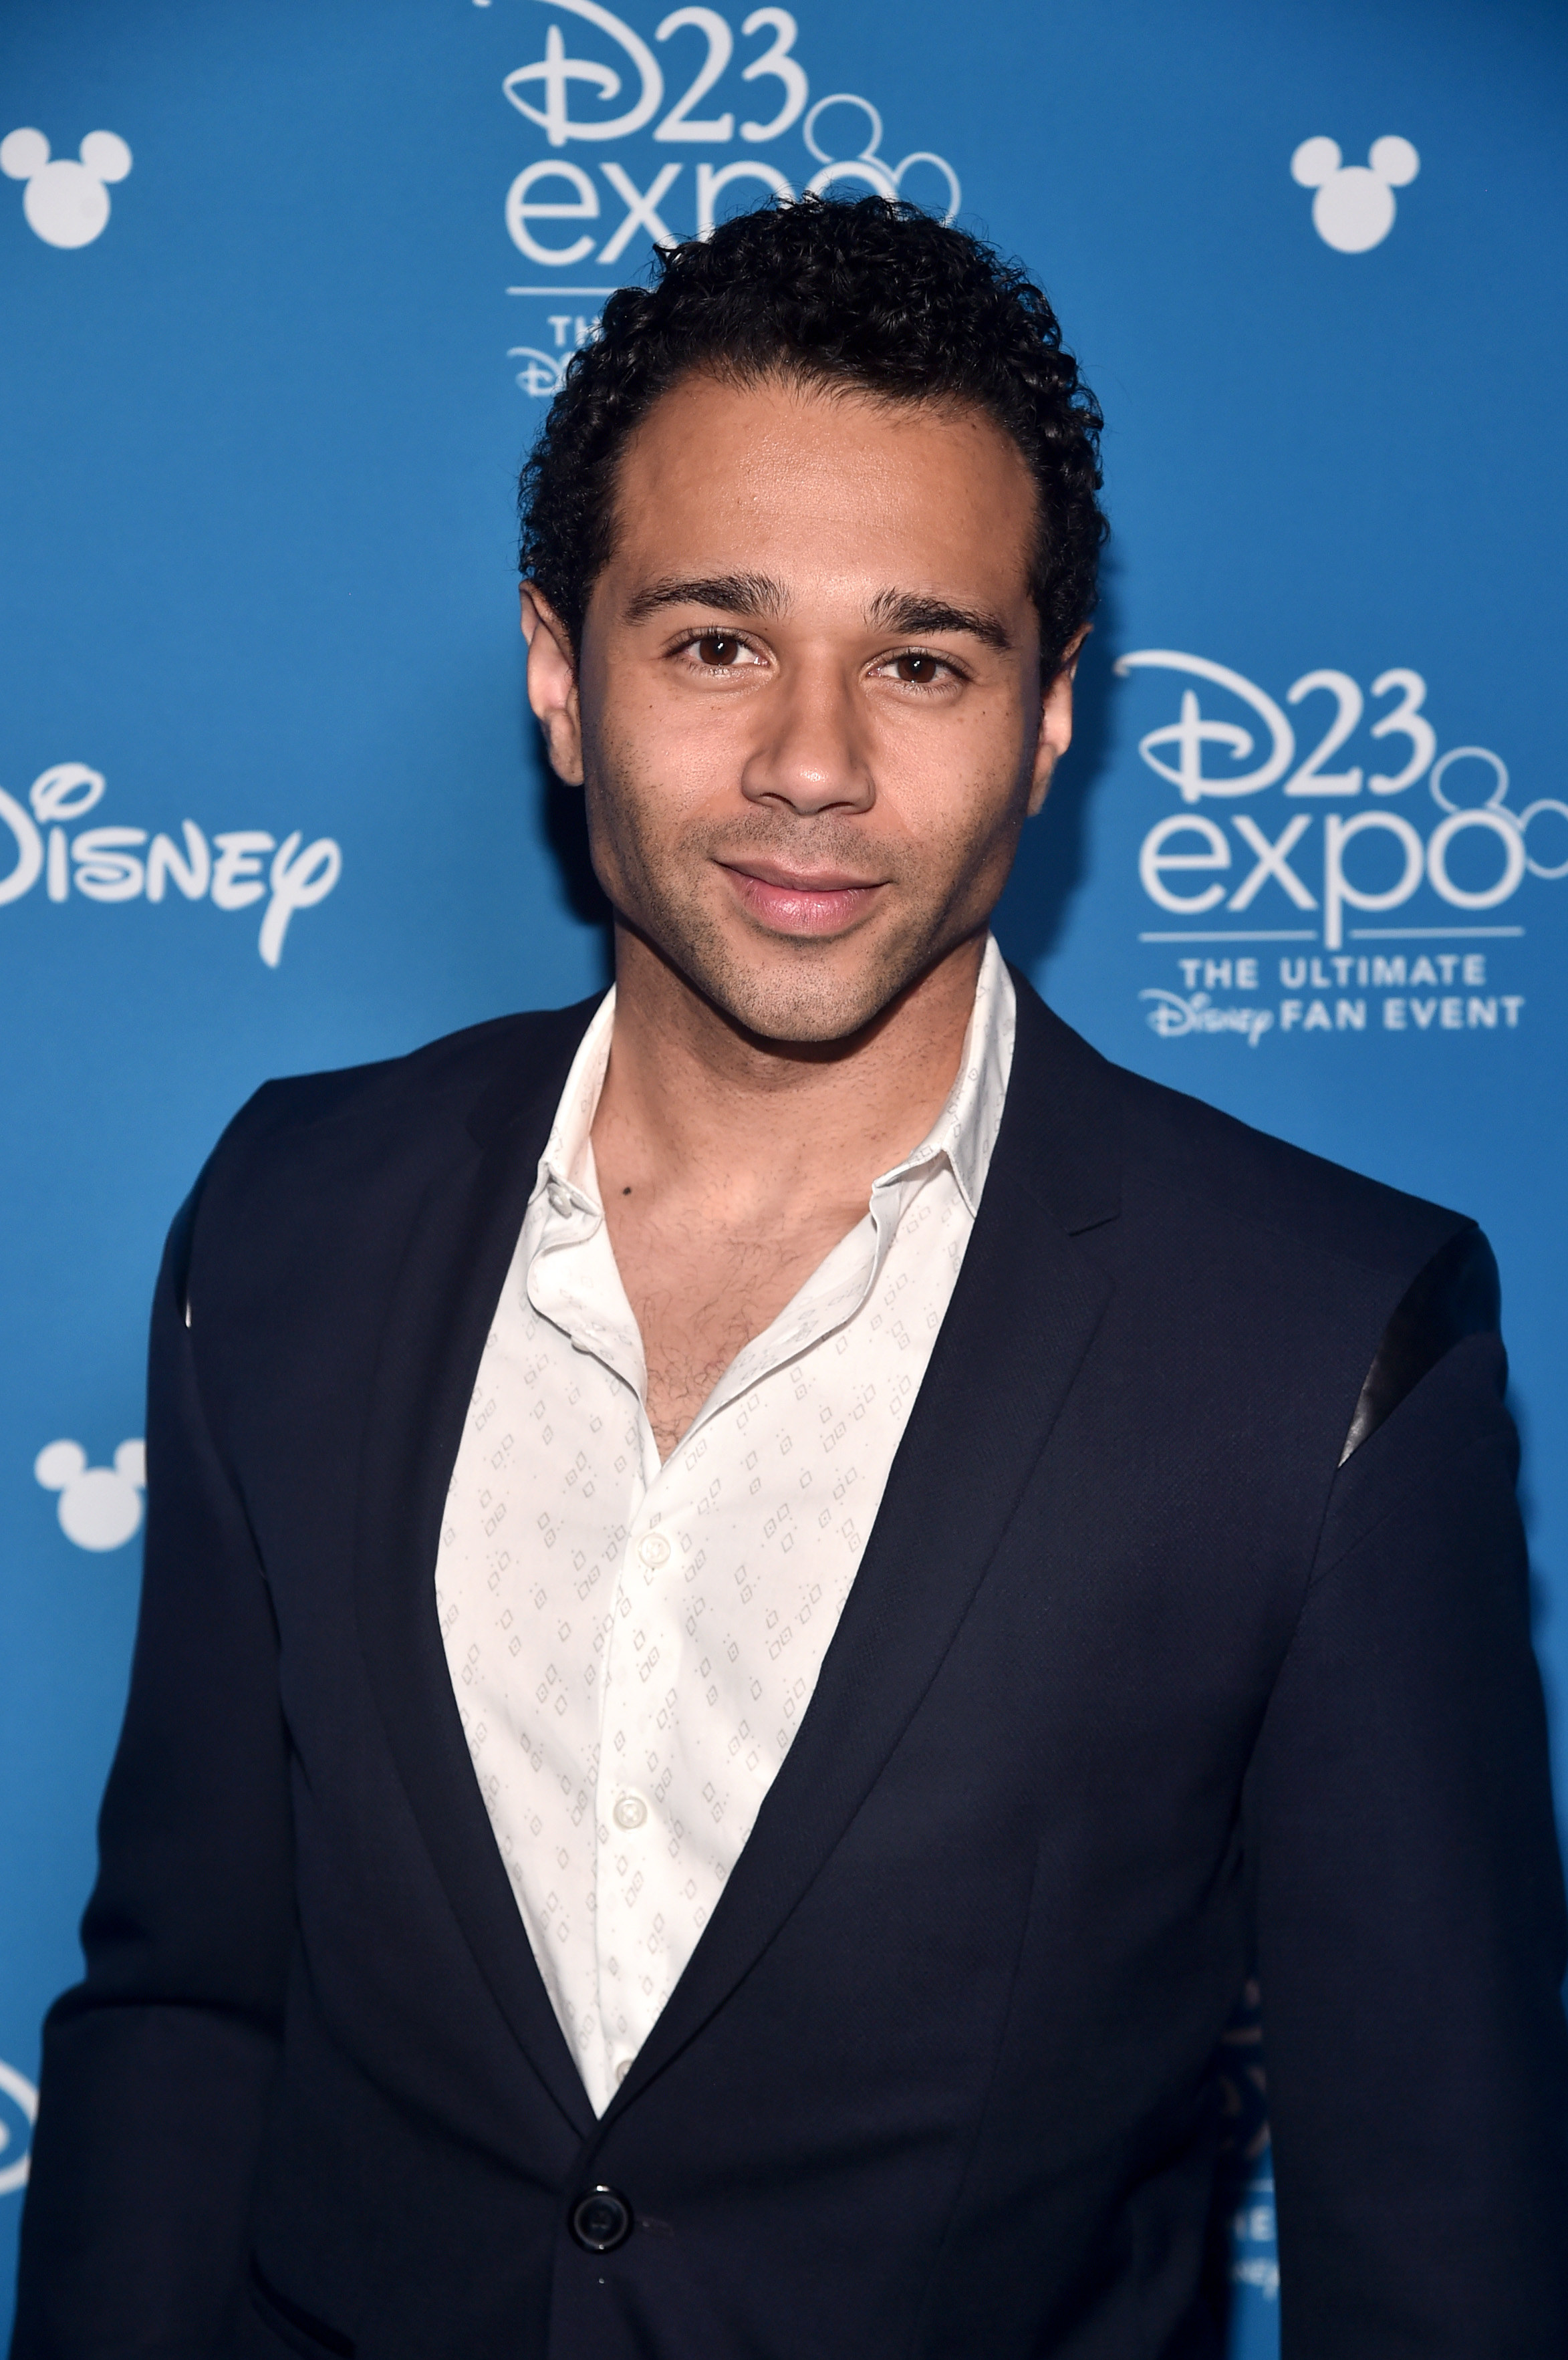 Corbin Bleu poses as he attends the Disney D23 Expo event in 2019